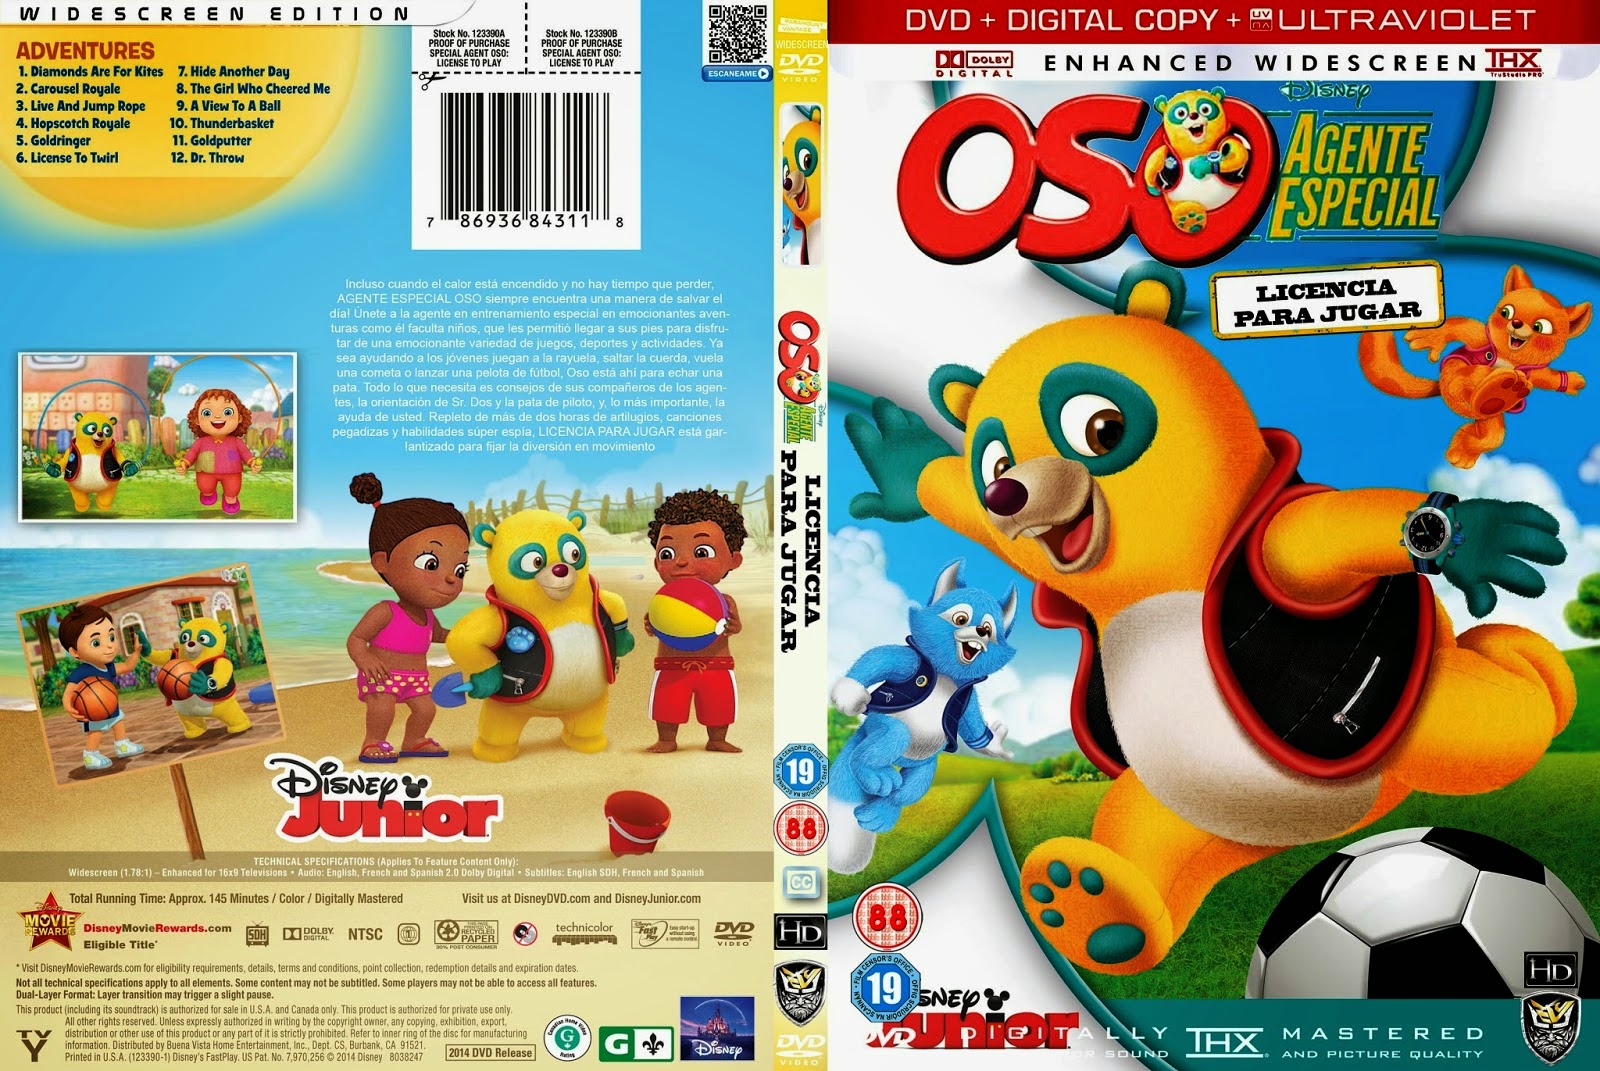 Superagent Oso / Special Agent Oso (2009-2011)